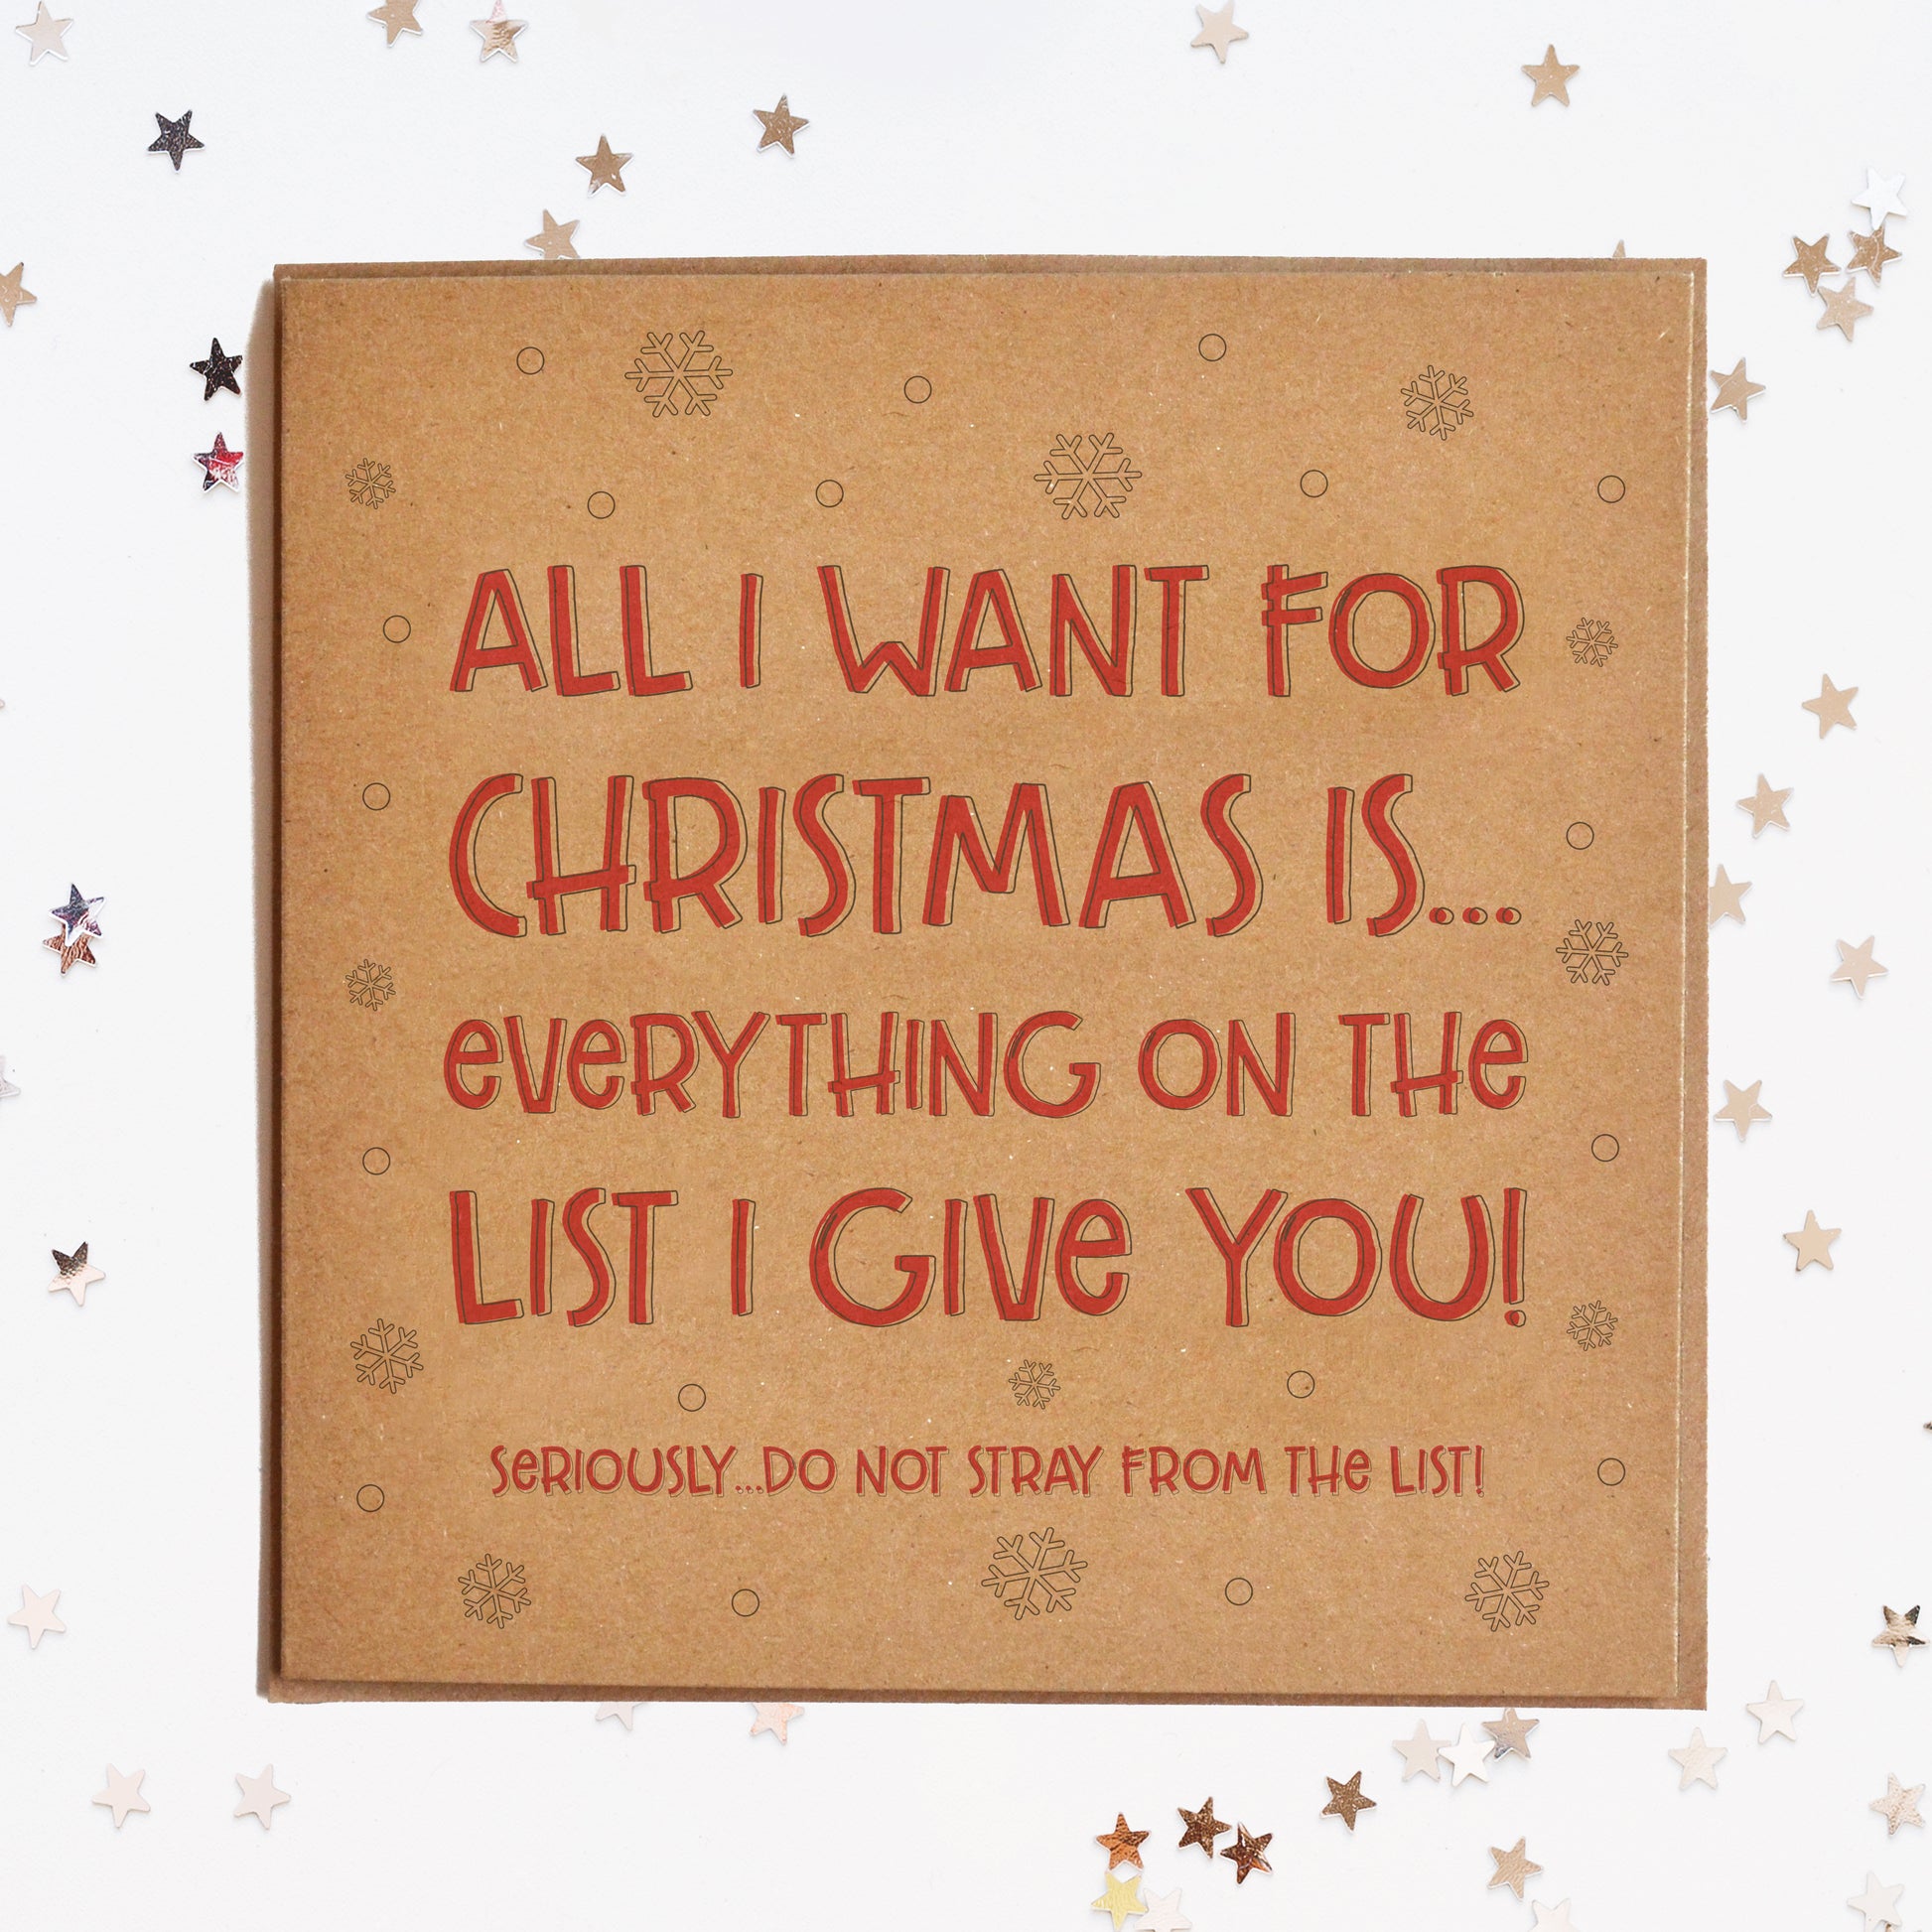 A funny Christmas card in festive colours and the message "All I Want For Christmas Is...Everything On The List I Give You! Seriously...Do Not Stray From The List!".